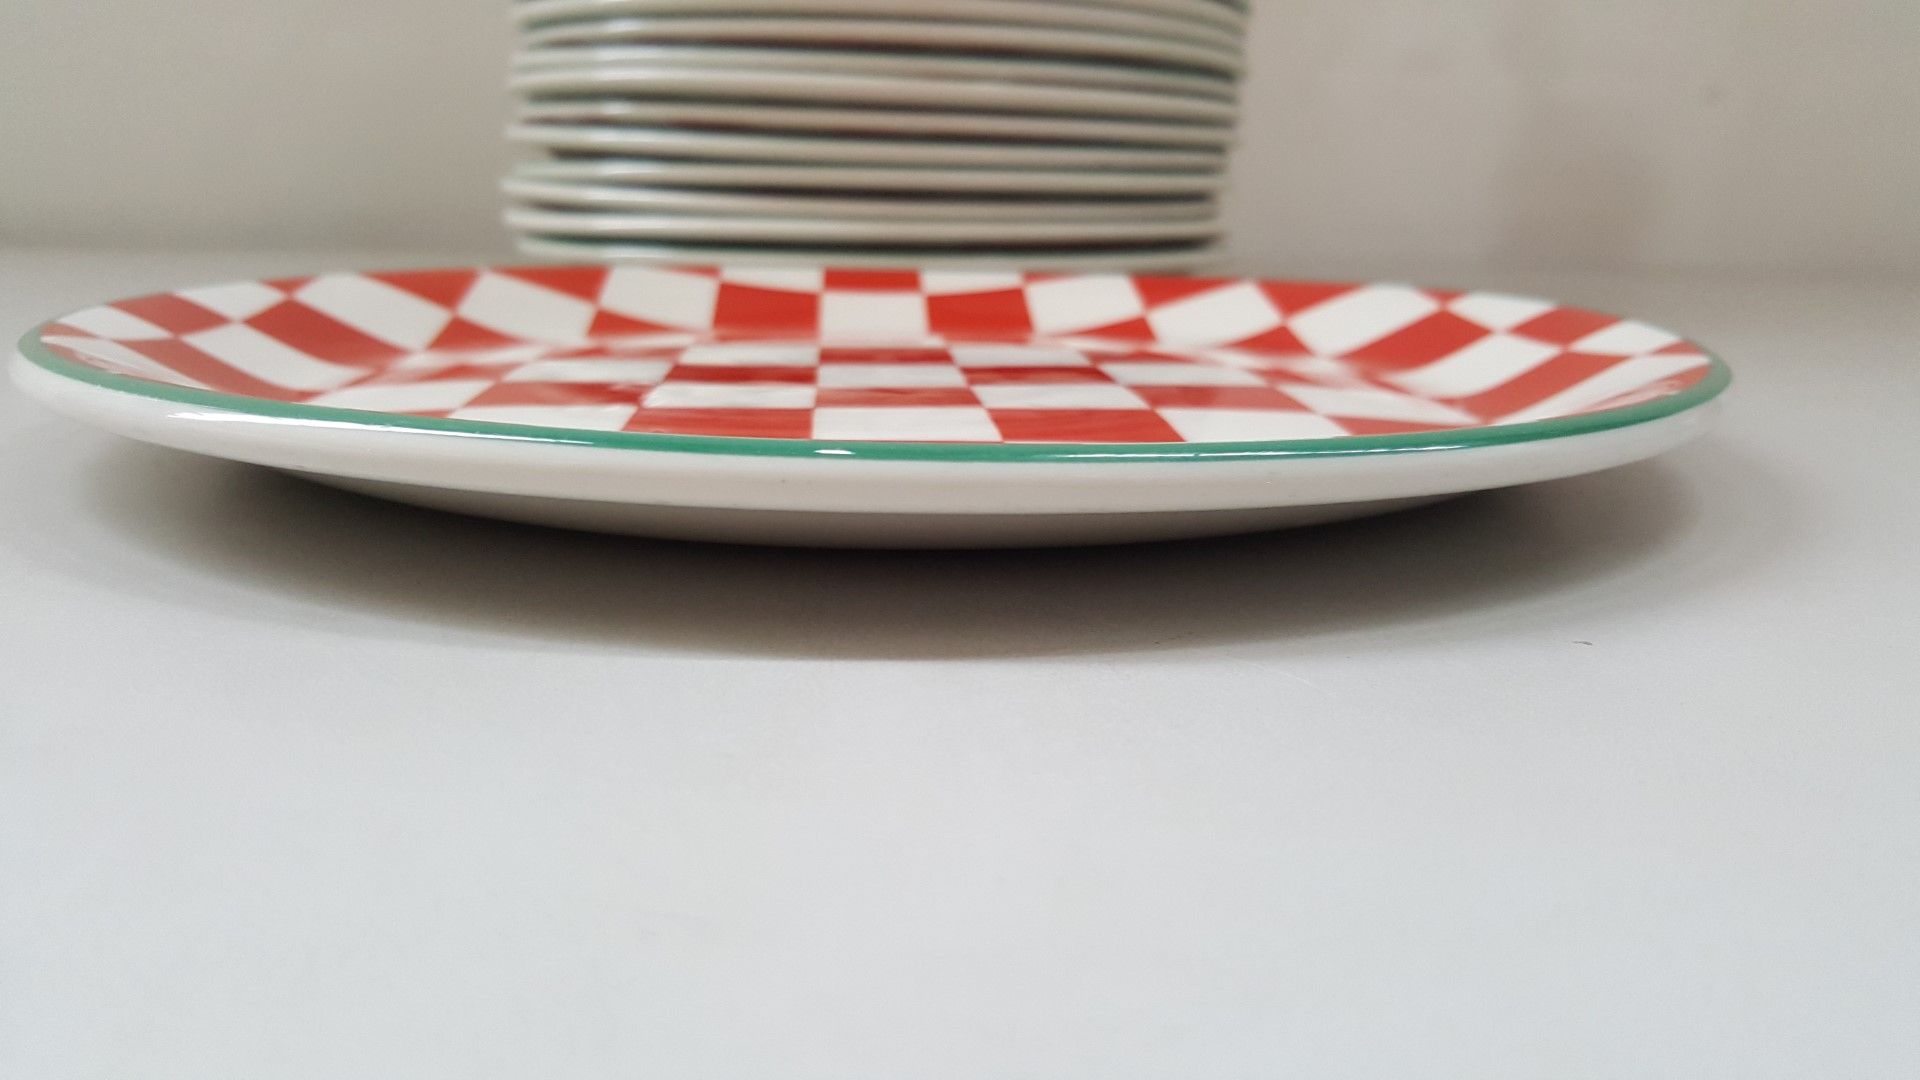 16 x Steelite Plates Checkered Red&White With Green Outline 25CM - Ref CQ280 - Image 4 of 4